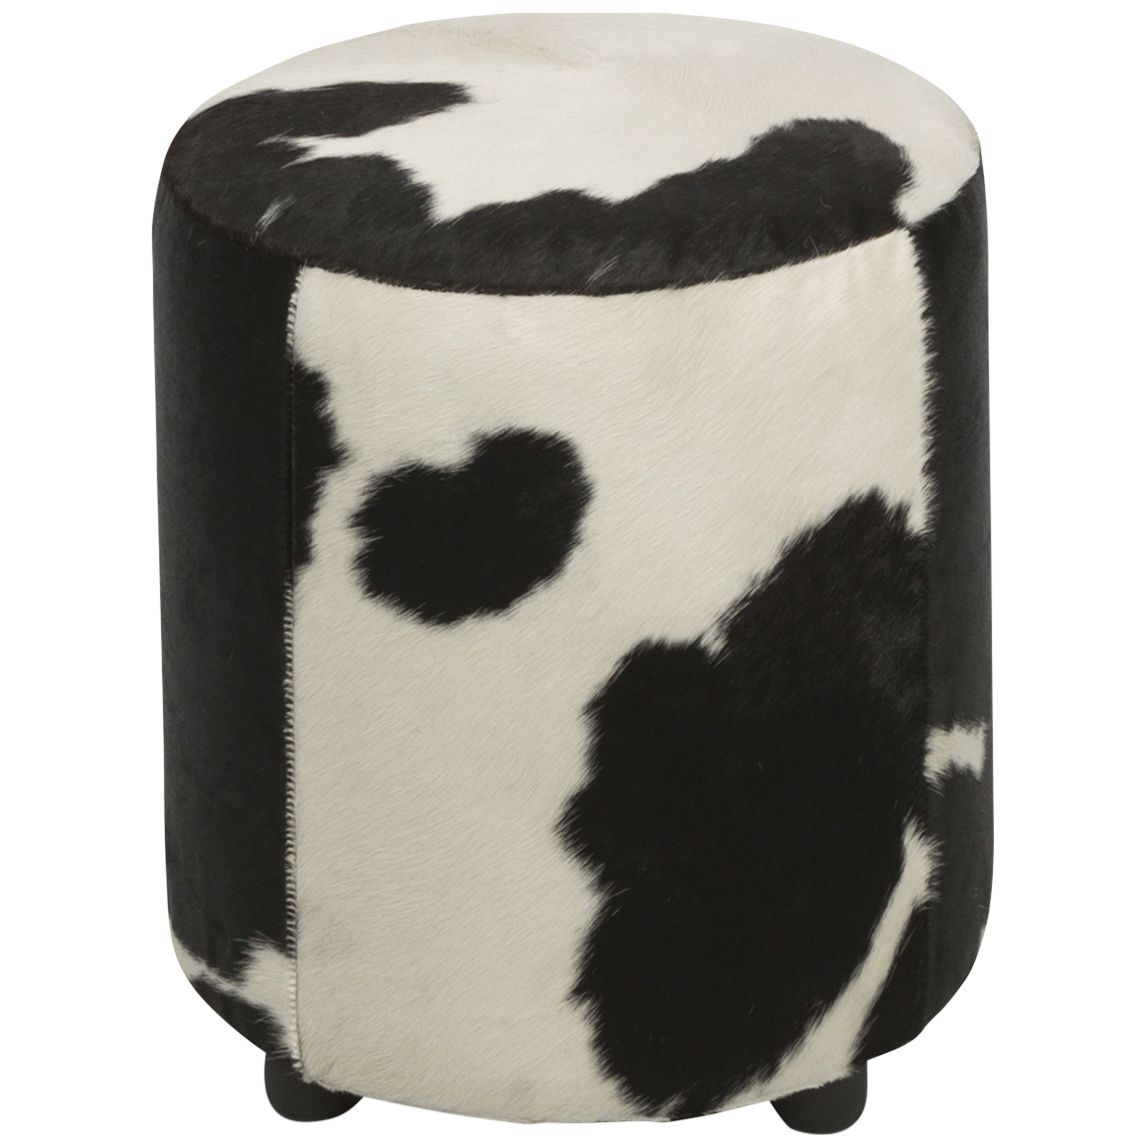 Lifestyle Traders Black & White Round Cowhide Ottoman | Temple & Webster In White Cow Hide Ottomans (View 10 of 15)